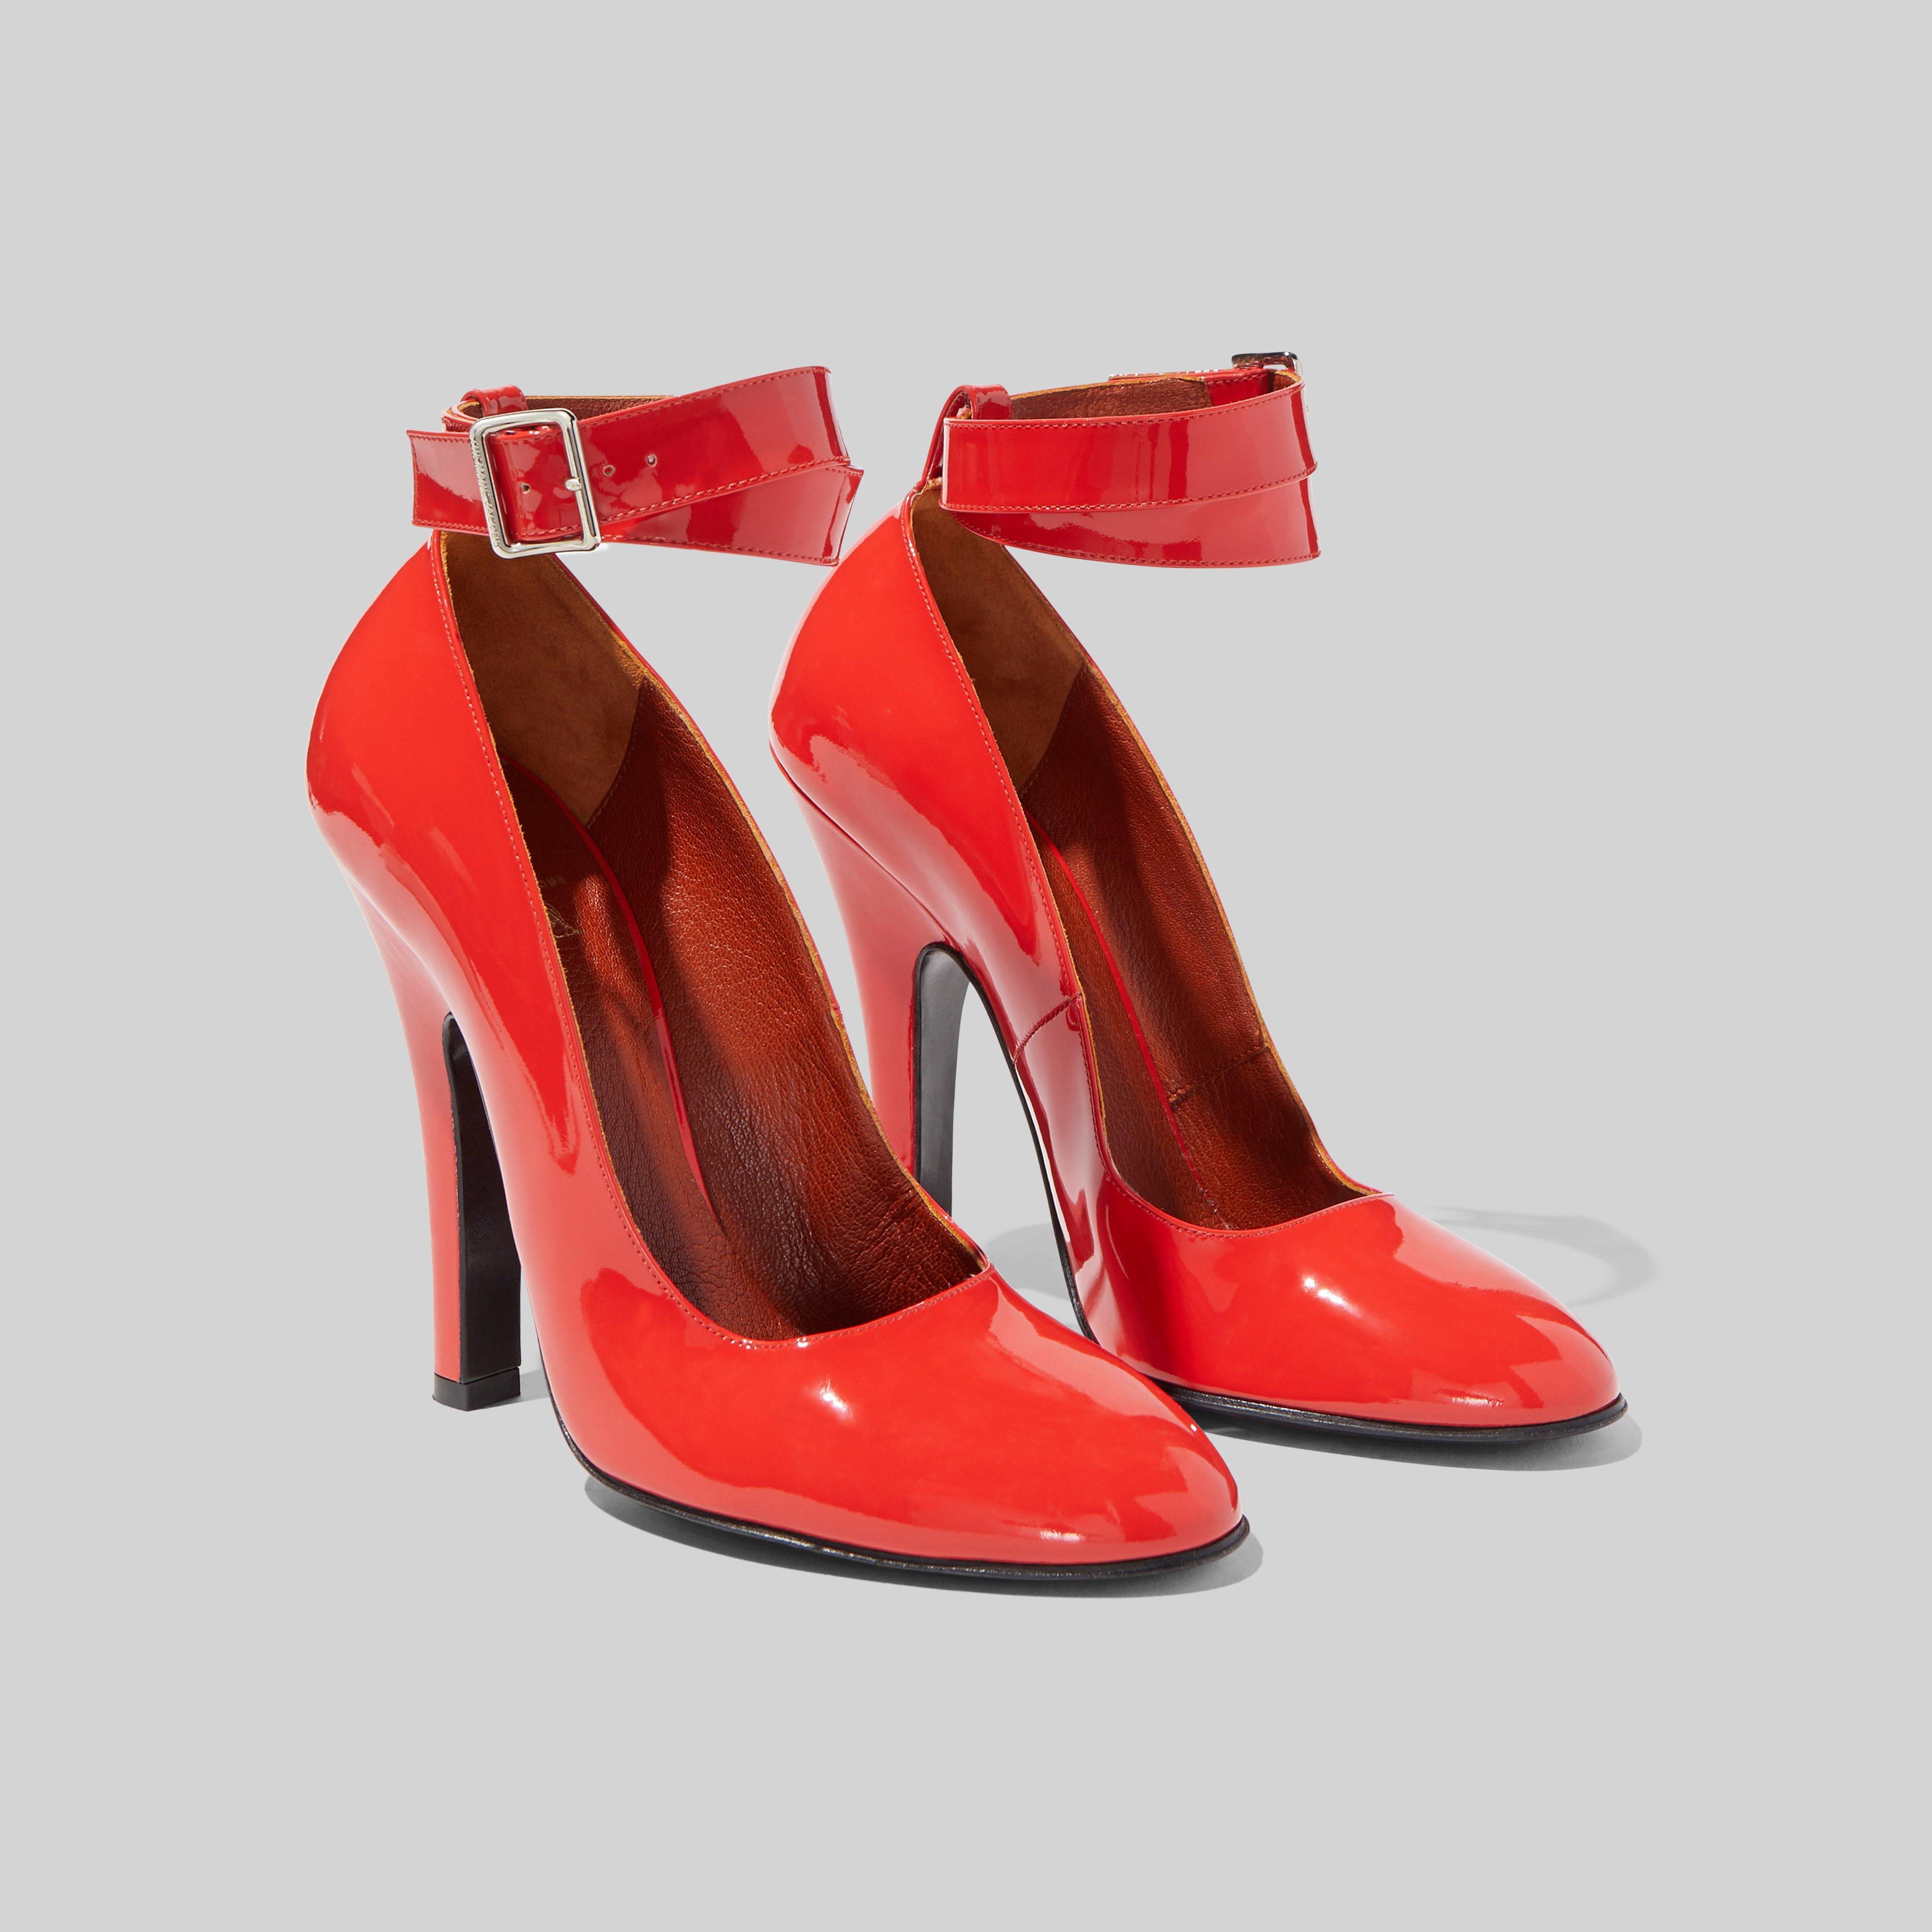 Marc Jacobs The Fetish Pumps Shoes in Red | Lyst